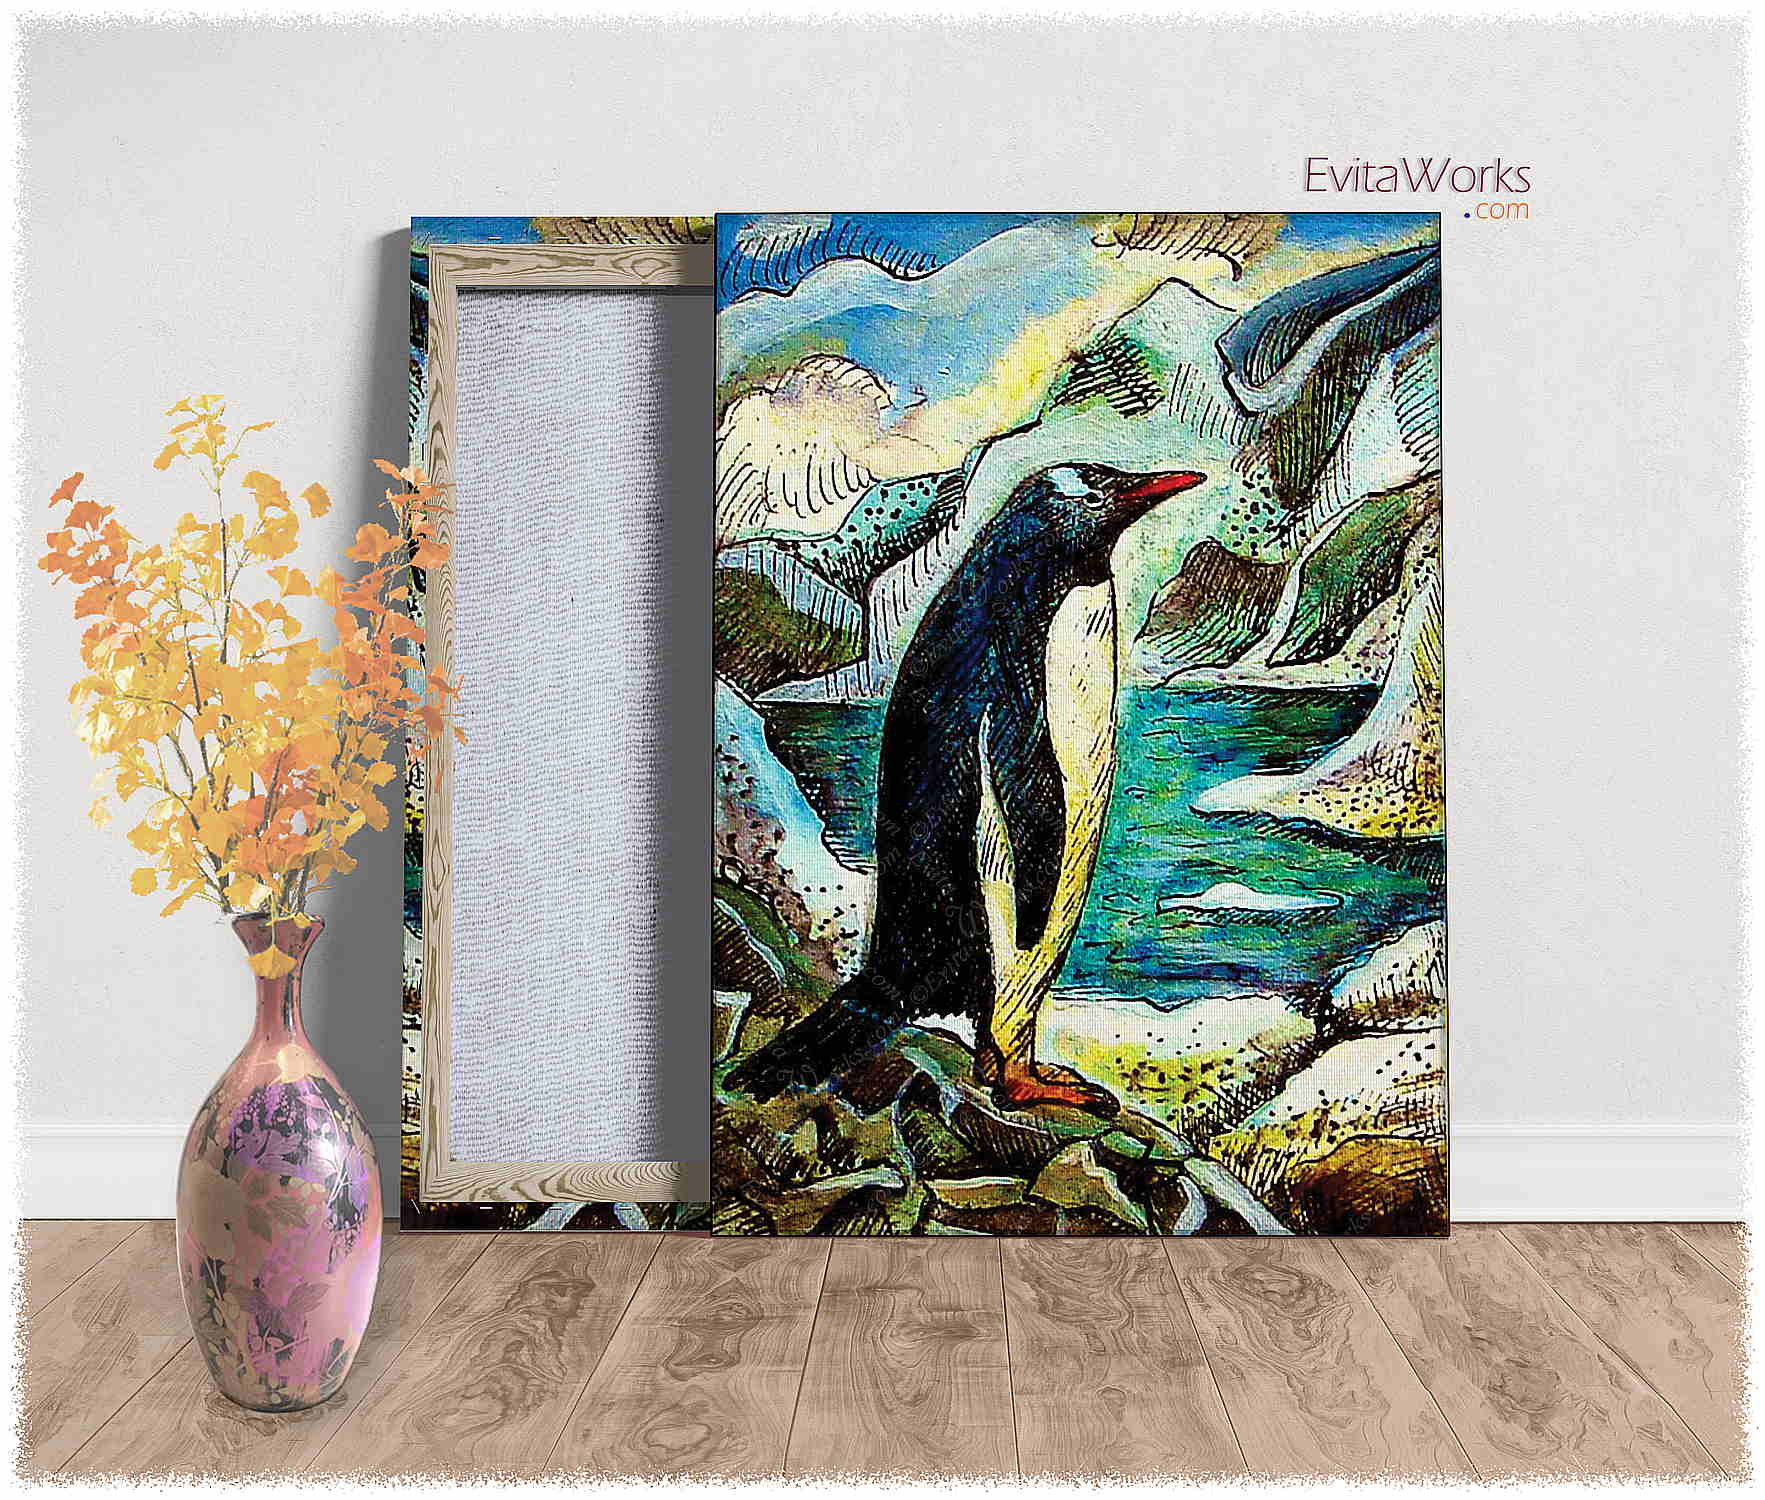 Hit to learn about "Bird in nature illustration 03" on canvases